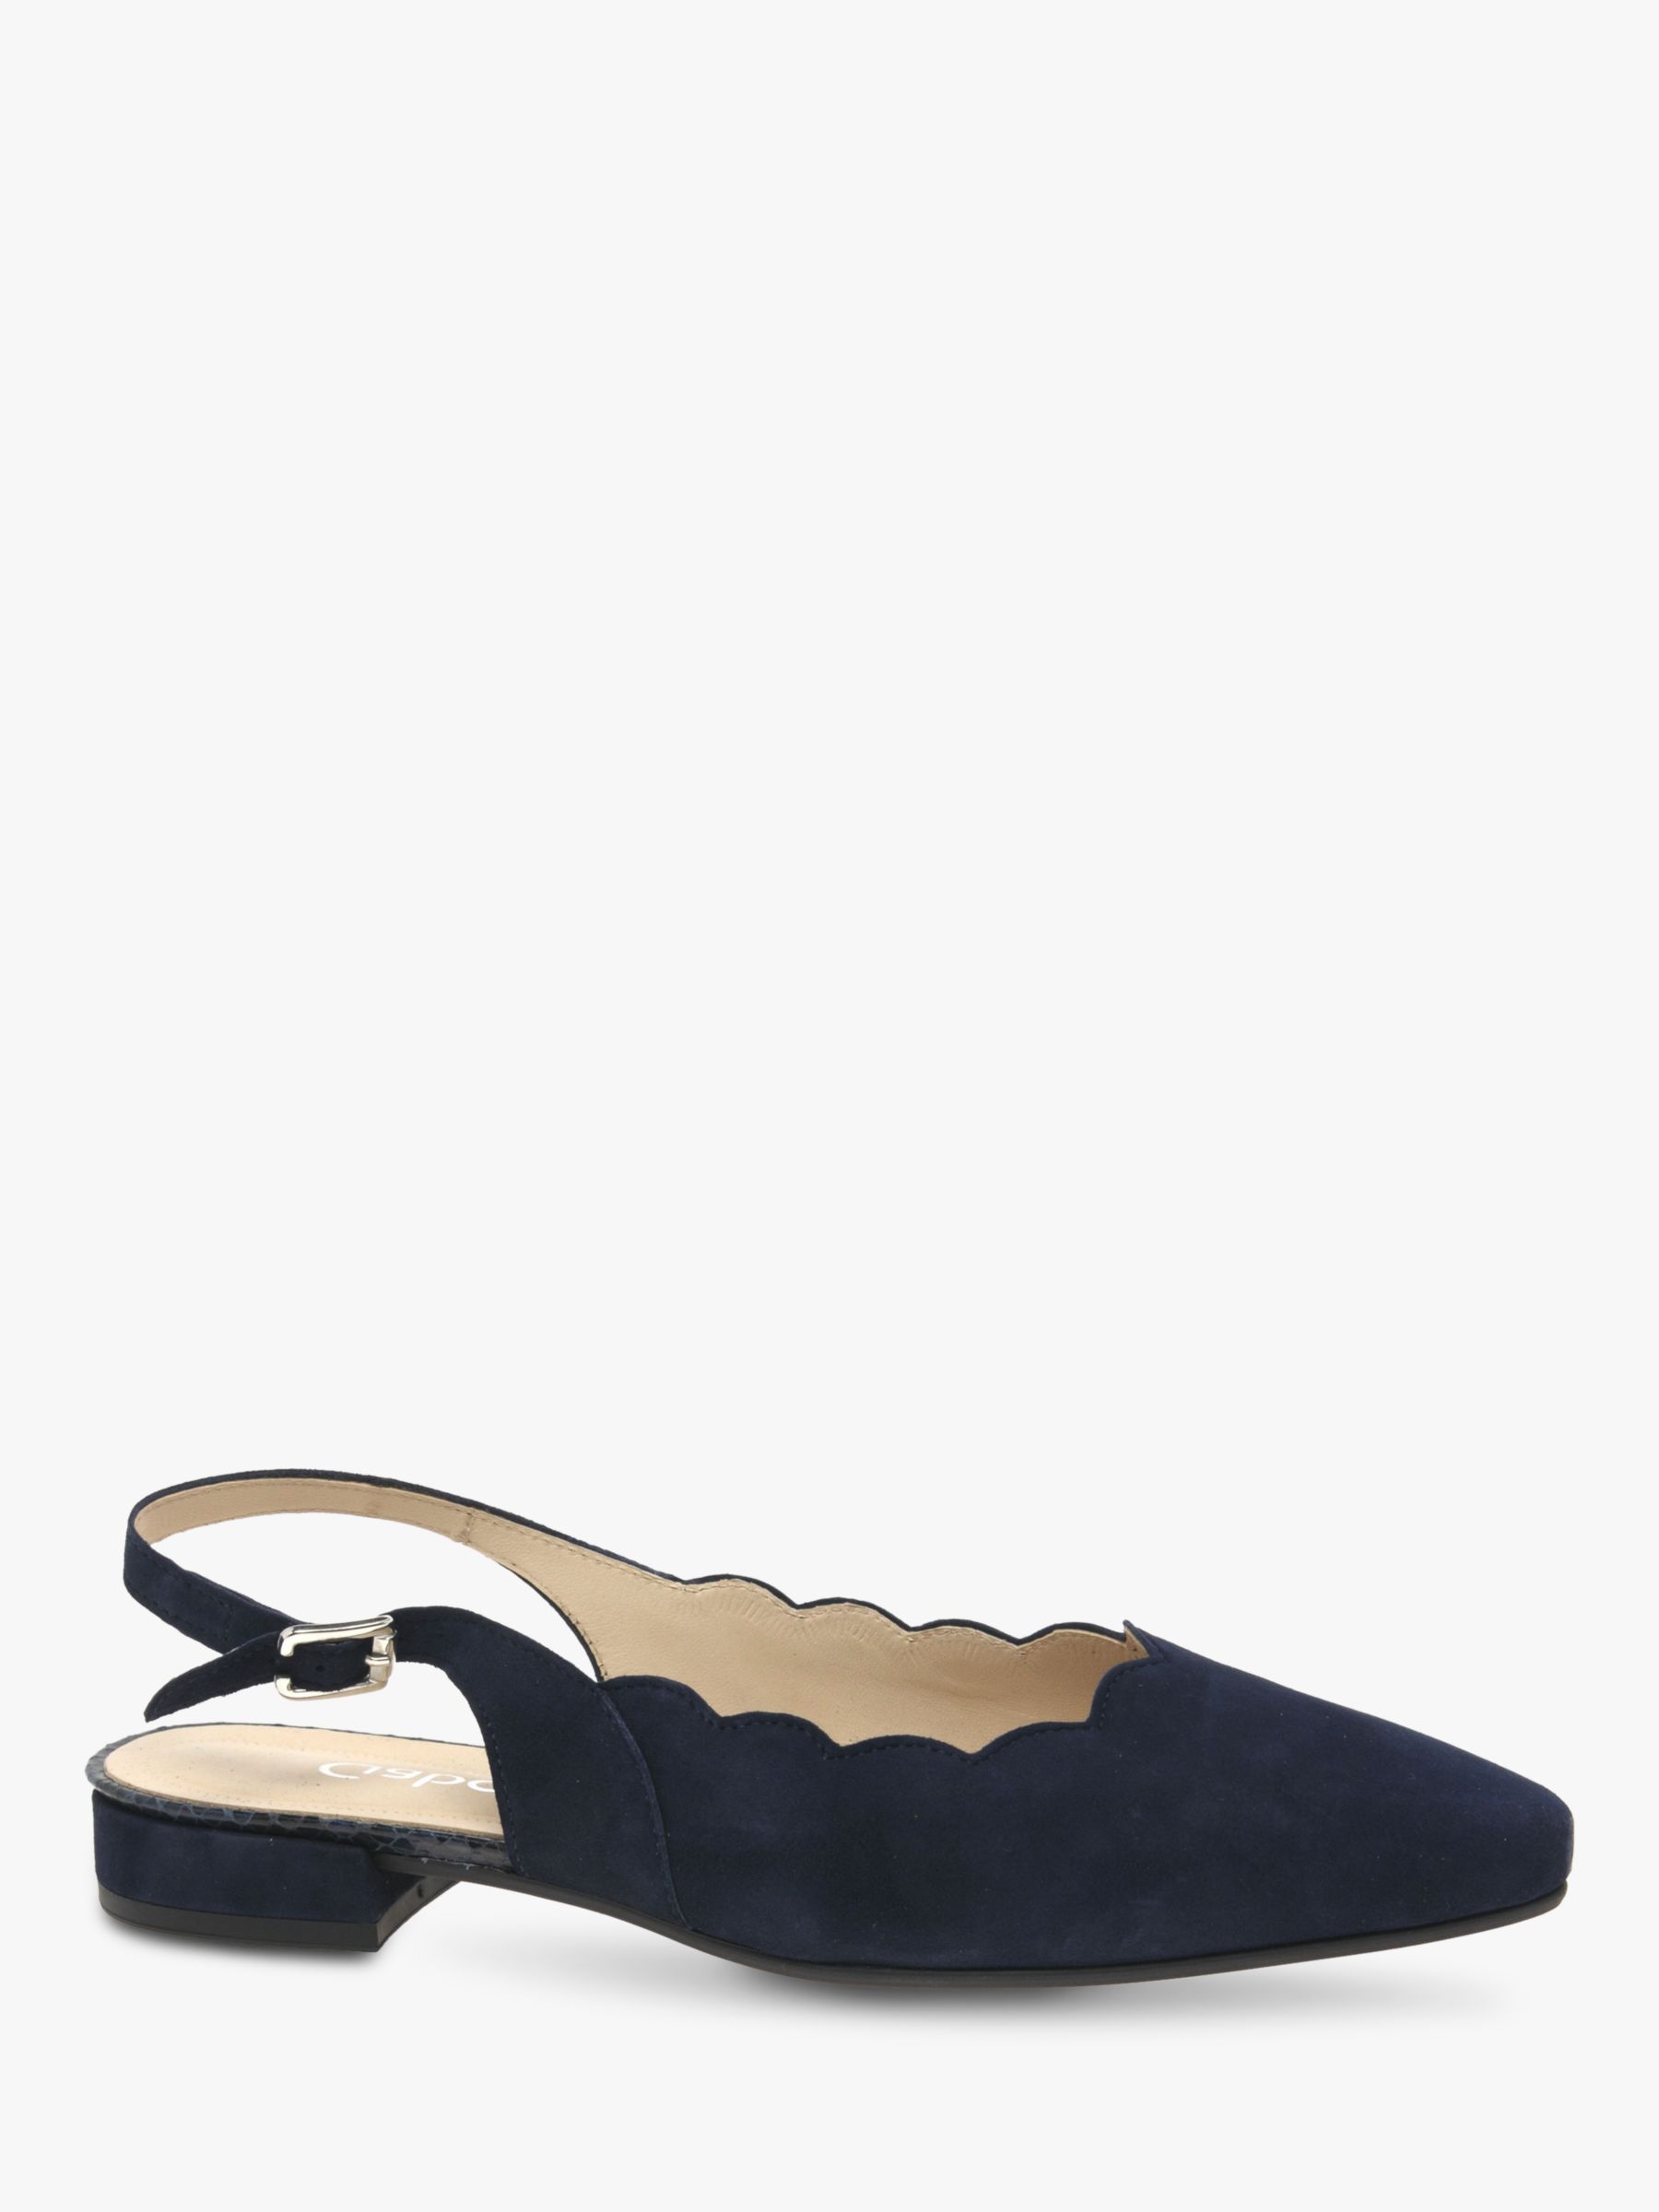 Gabor Maple Suede Wide Fit Court Shoes, Navy